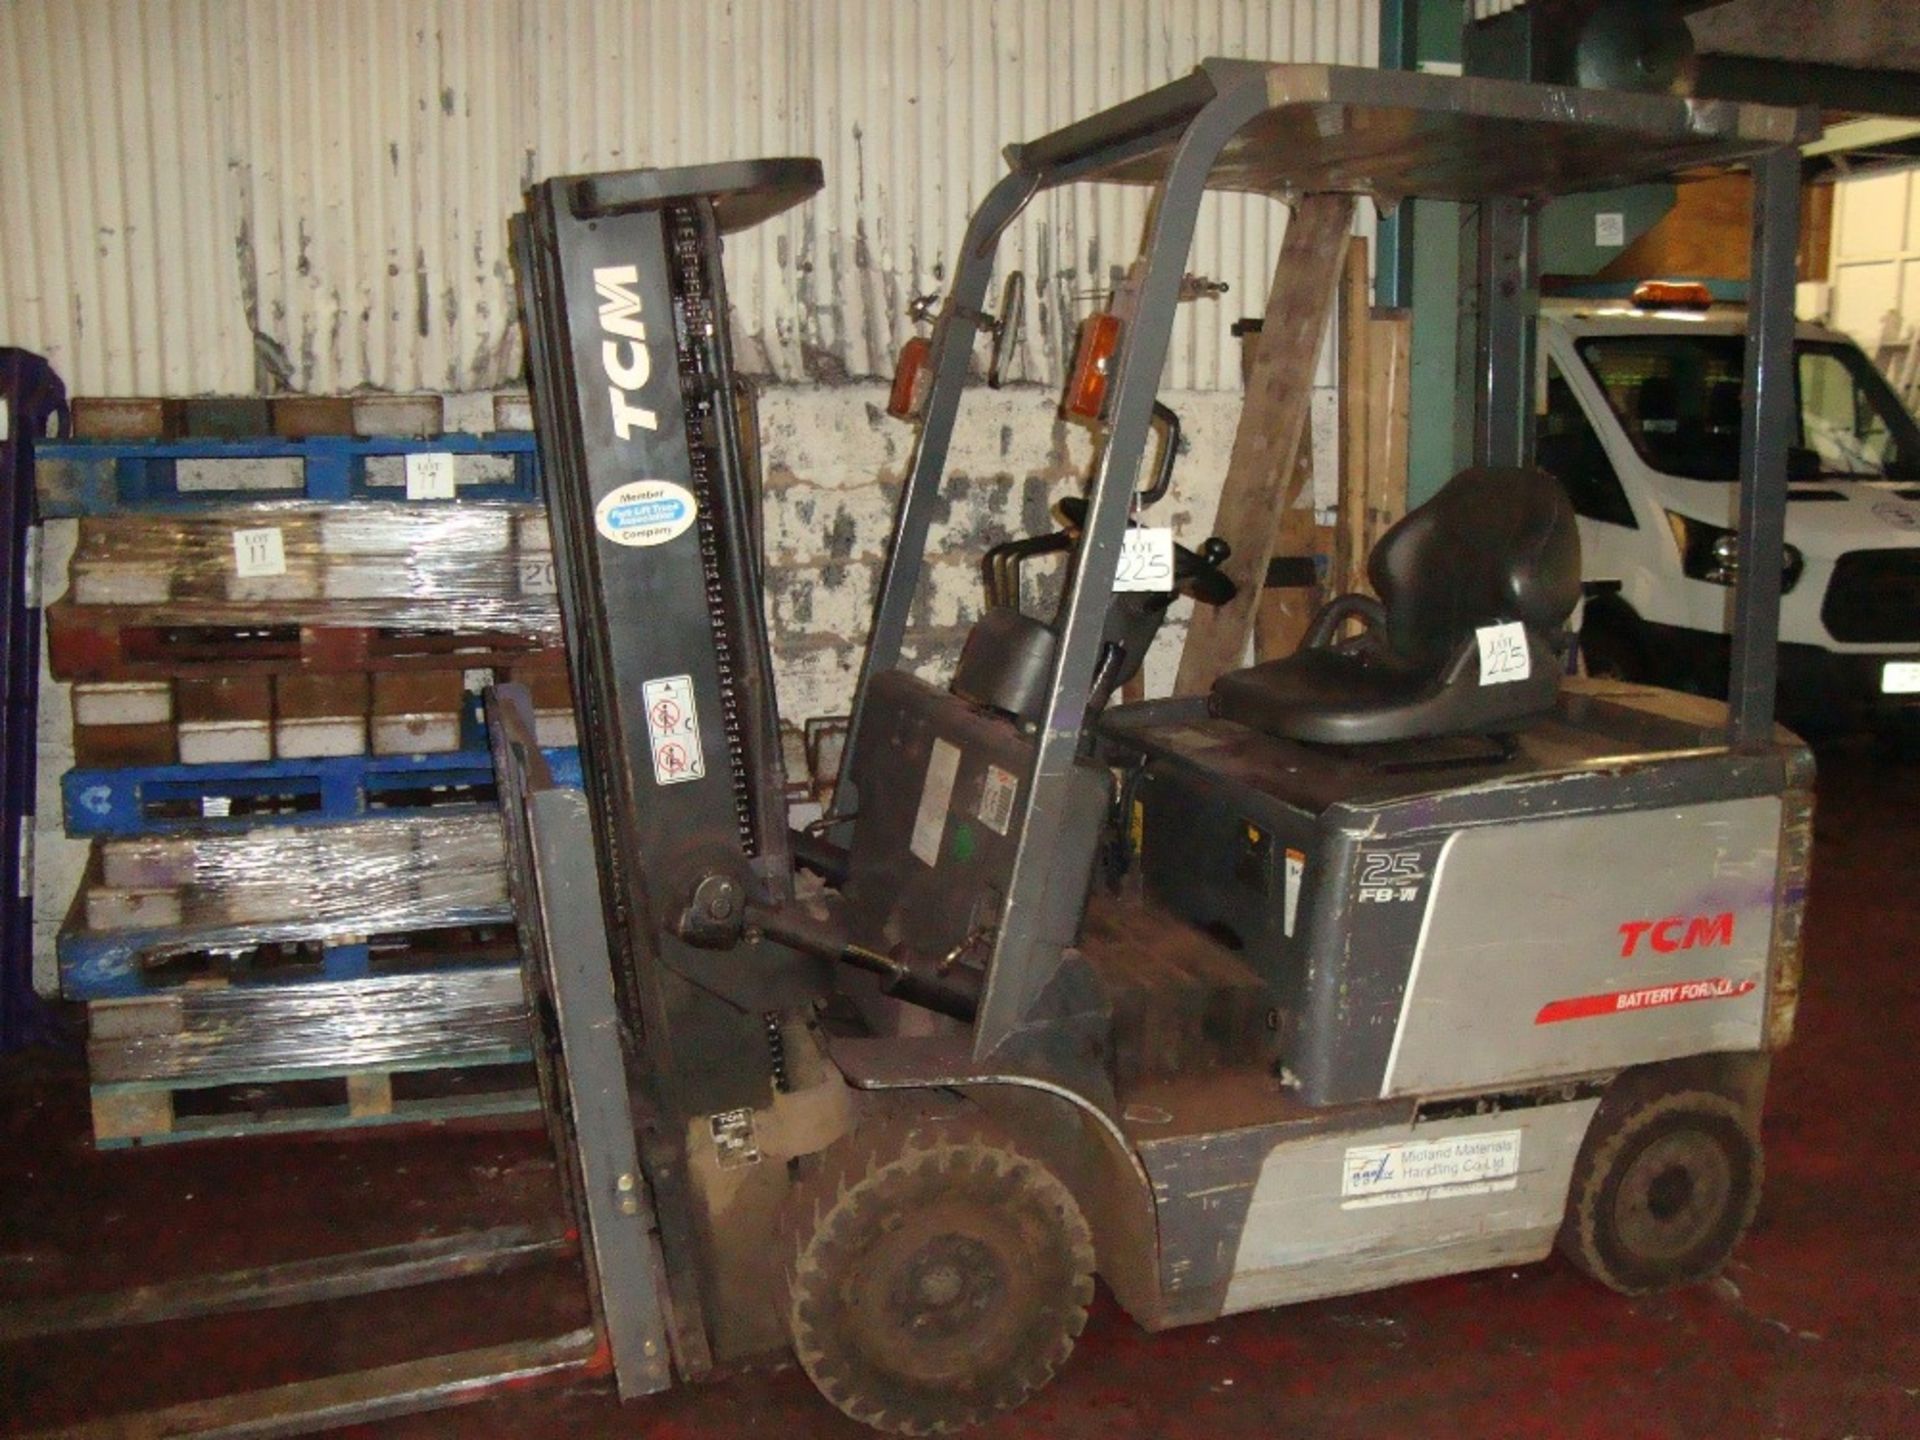 A TCM 25 FB-VII battery electric fork lift truck, Serial No. 61N03587, 5,400 hours recorded (2006)